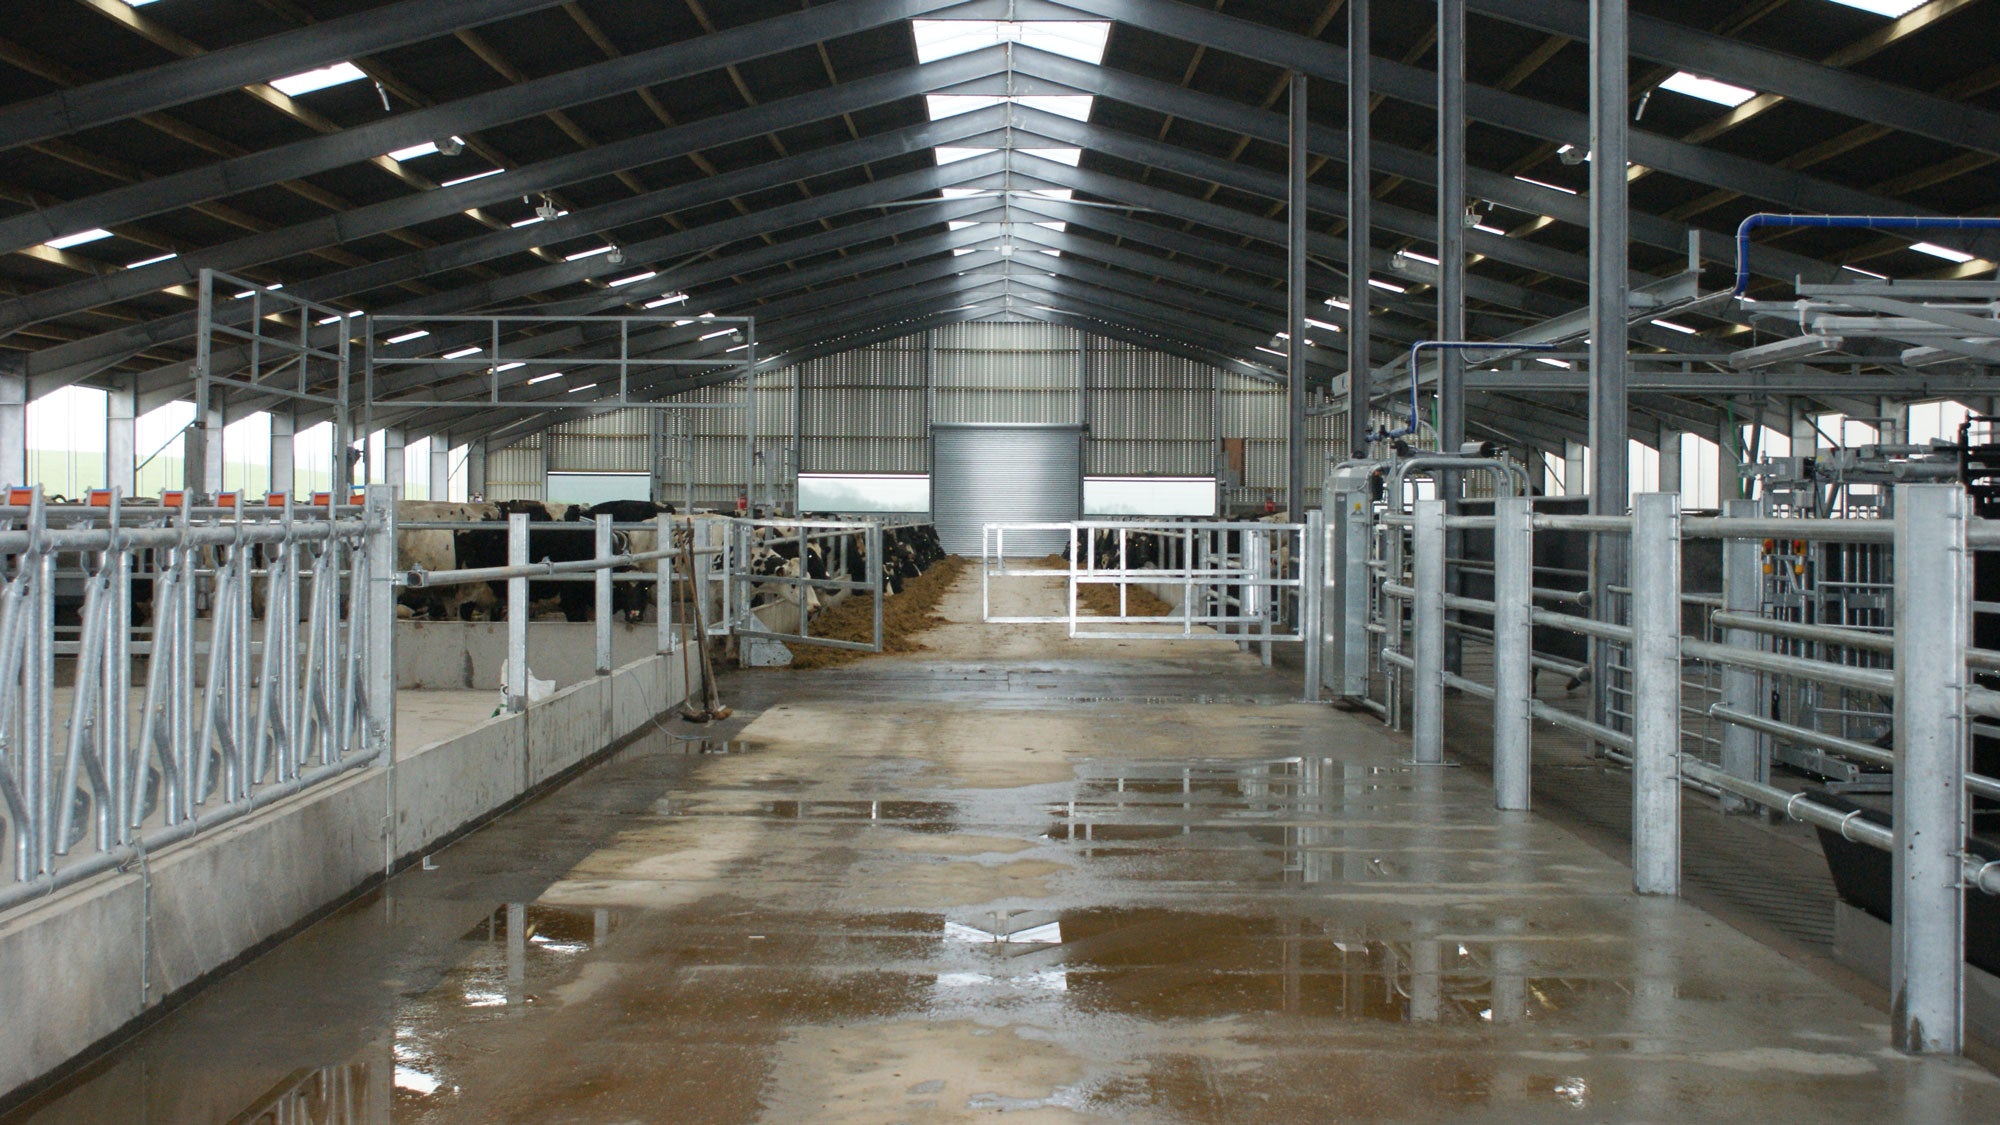 This is a layout we installed, including milking, feeding, and sleeping areas for a flock of cows